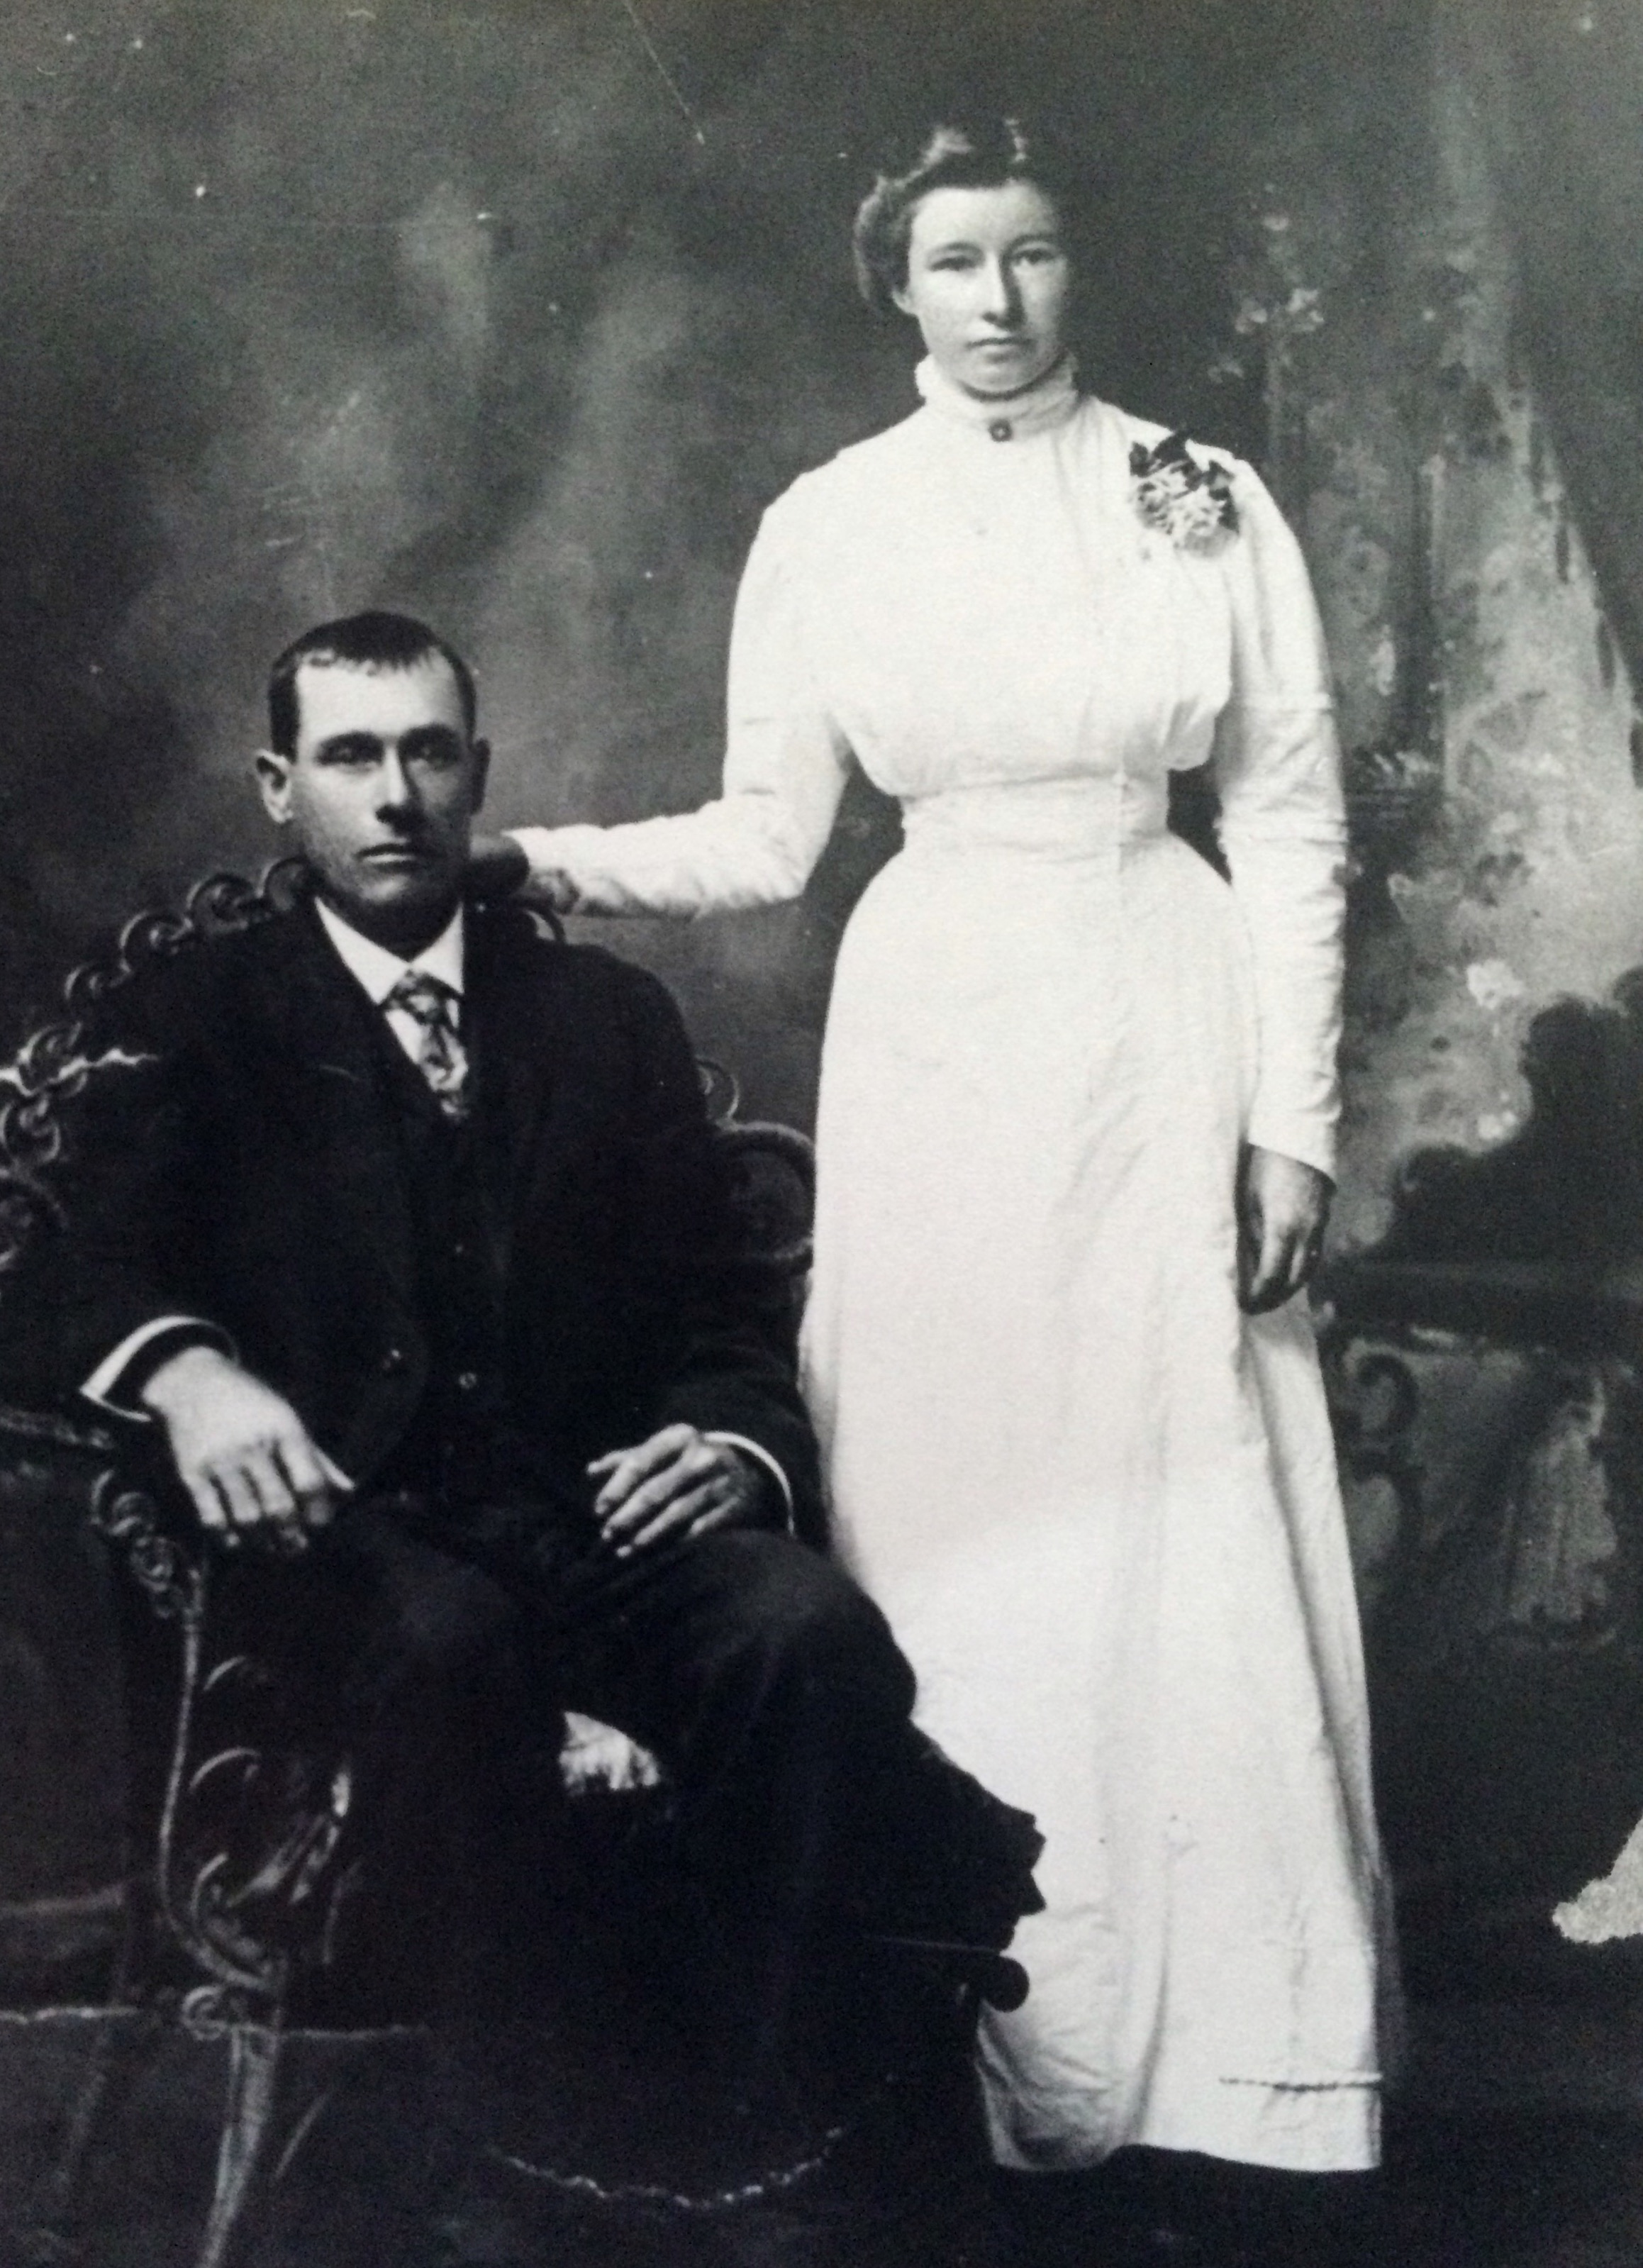 Great grandparents John Thomas and Clara Belle Locklear. This was their wedding photo from 1908 in Paris, TX.